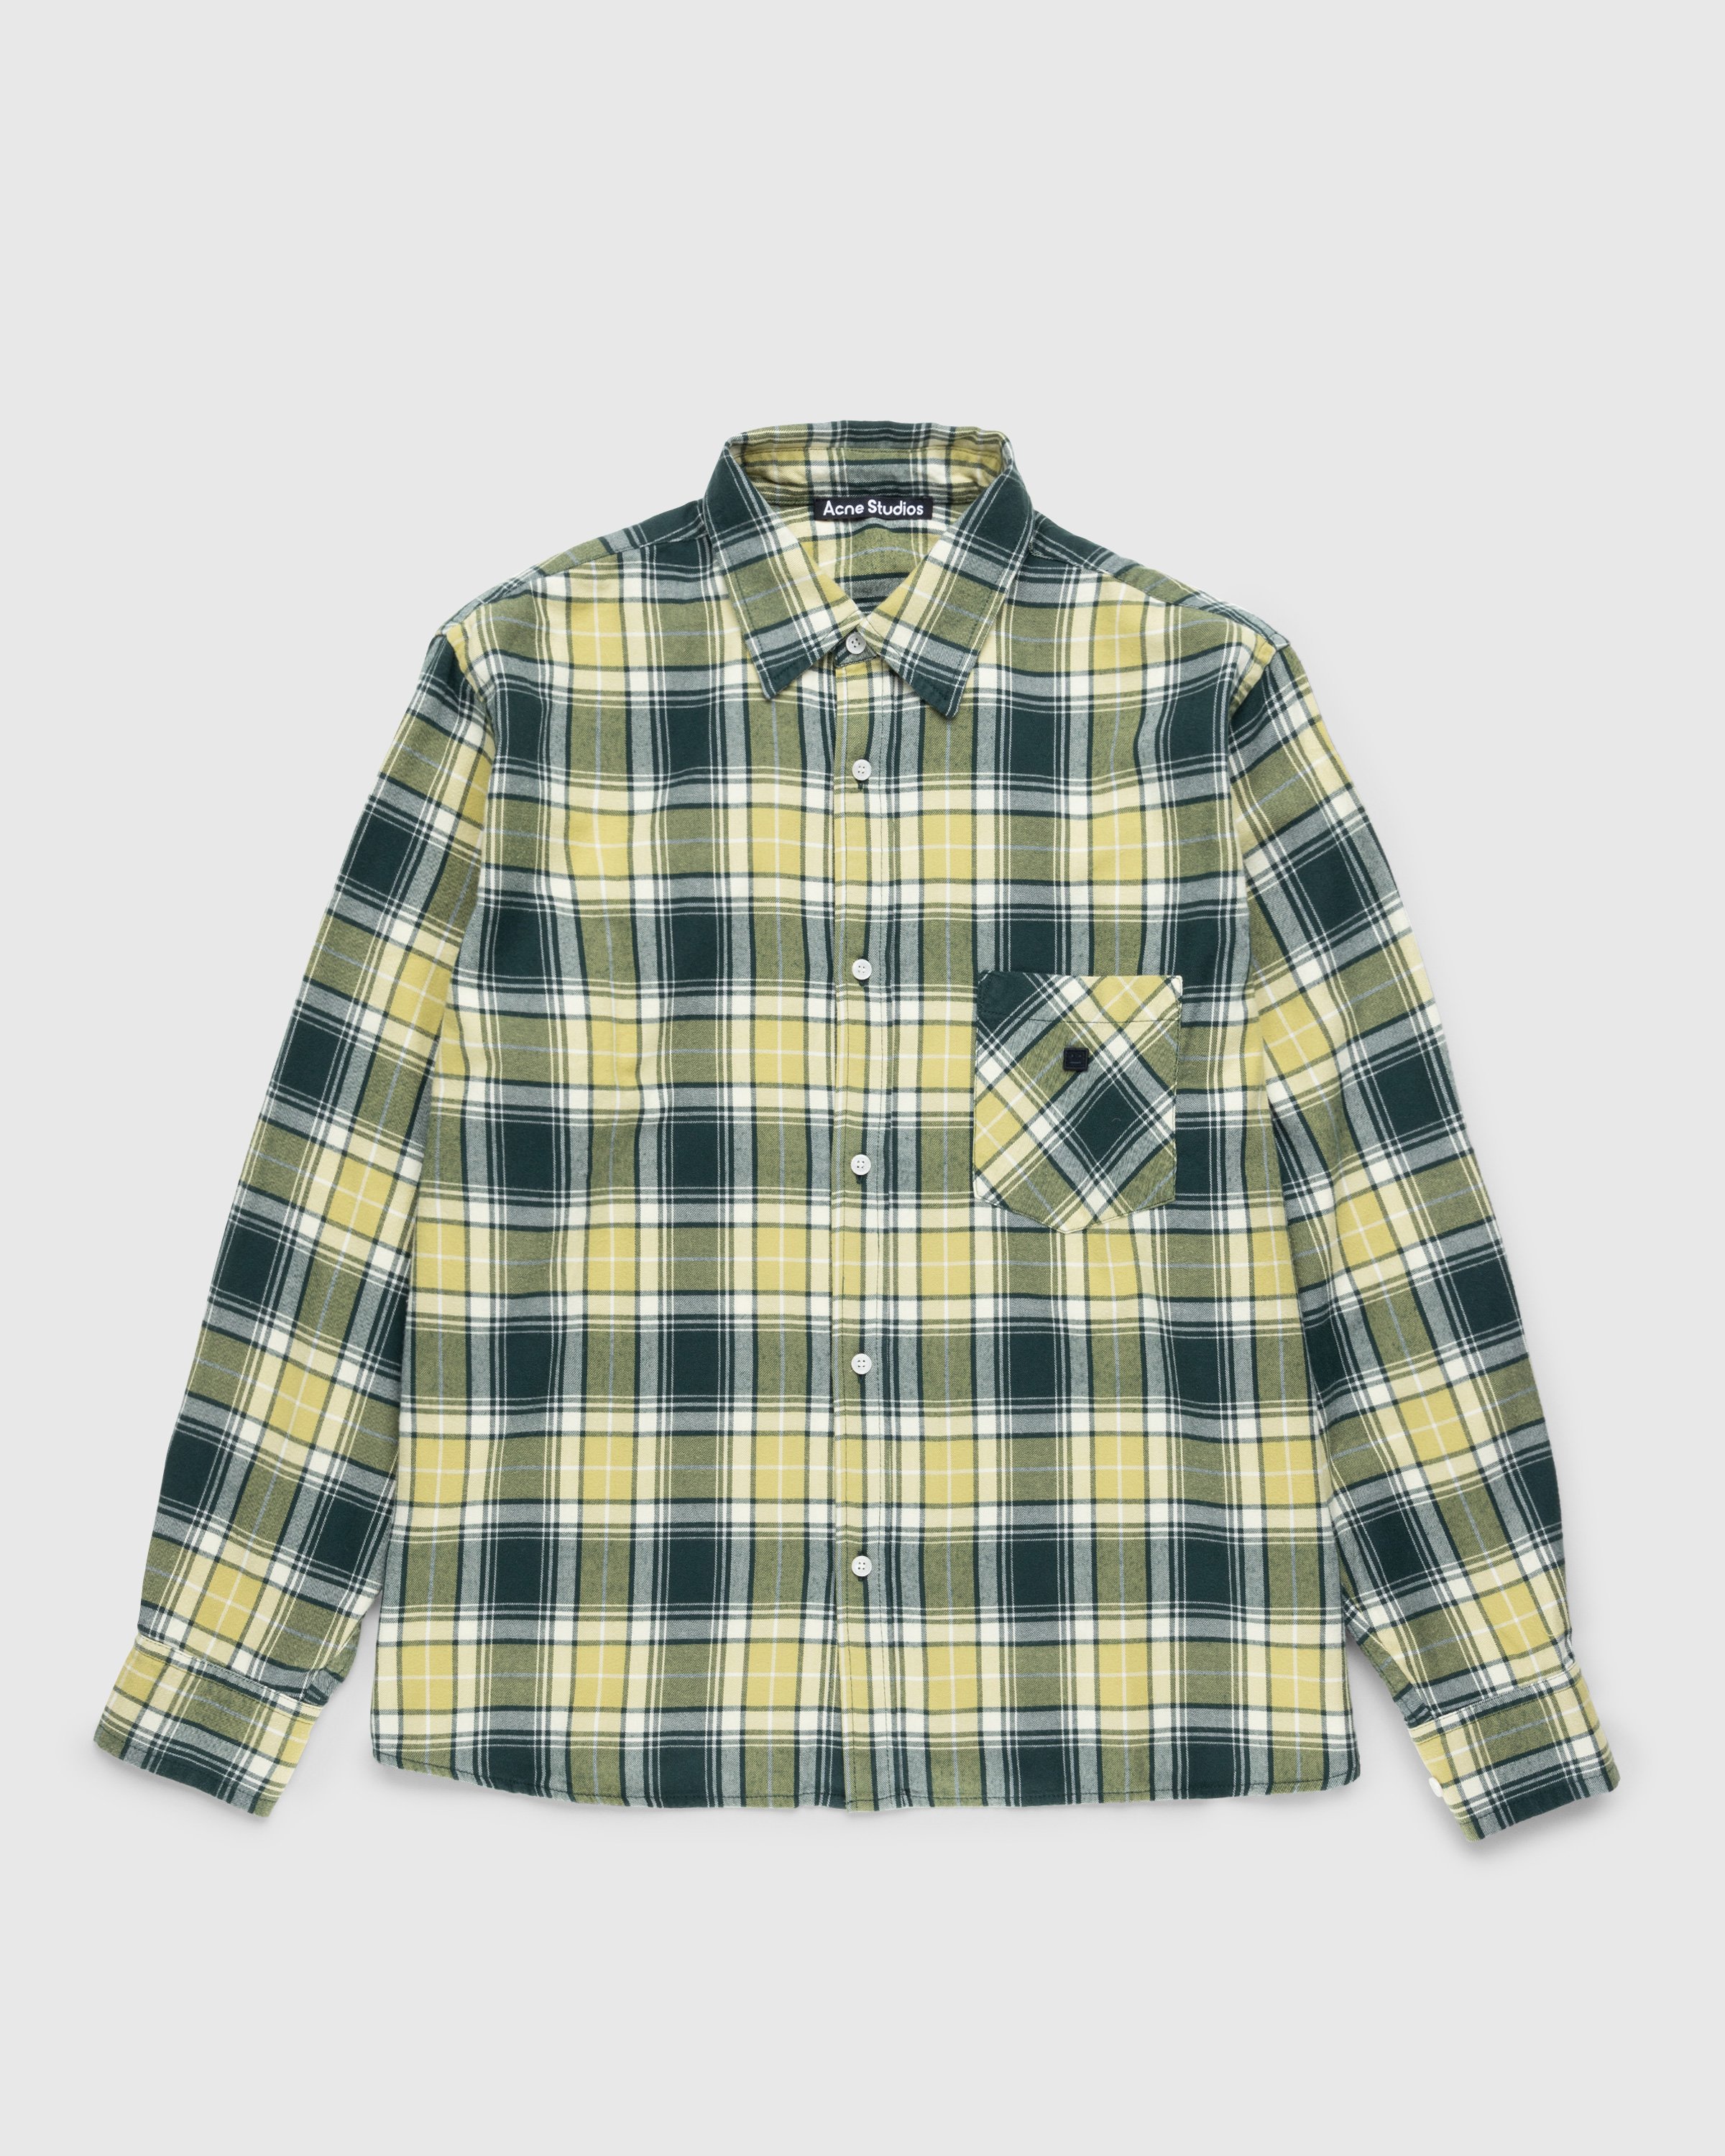 Acne Studios - Check Button-Up Shirt Forest Green/Light Green - Clothing - Green - Image 1